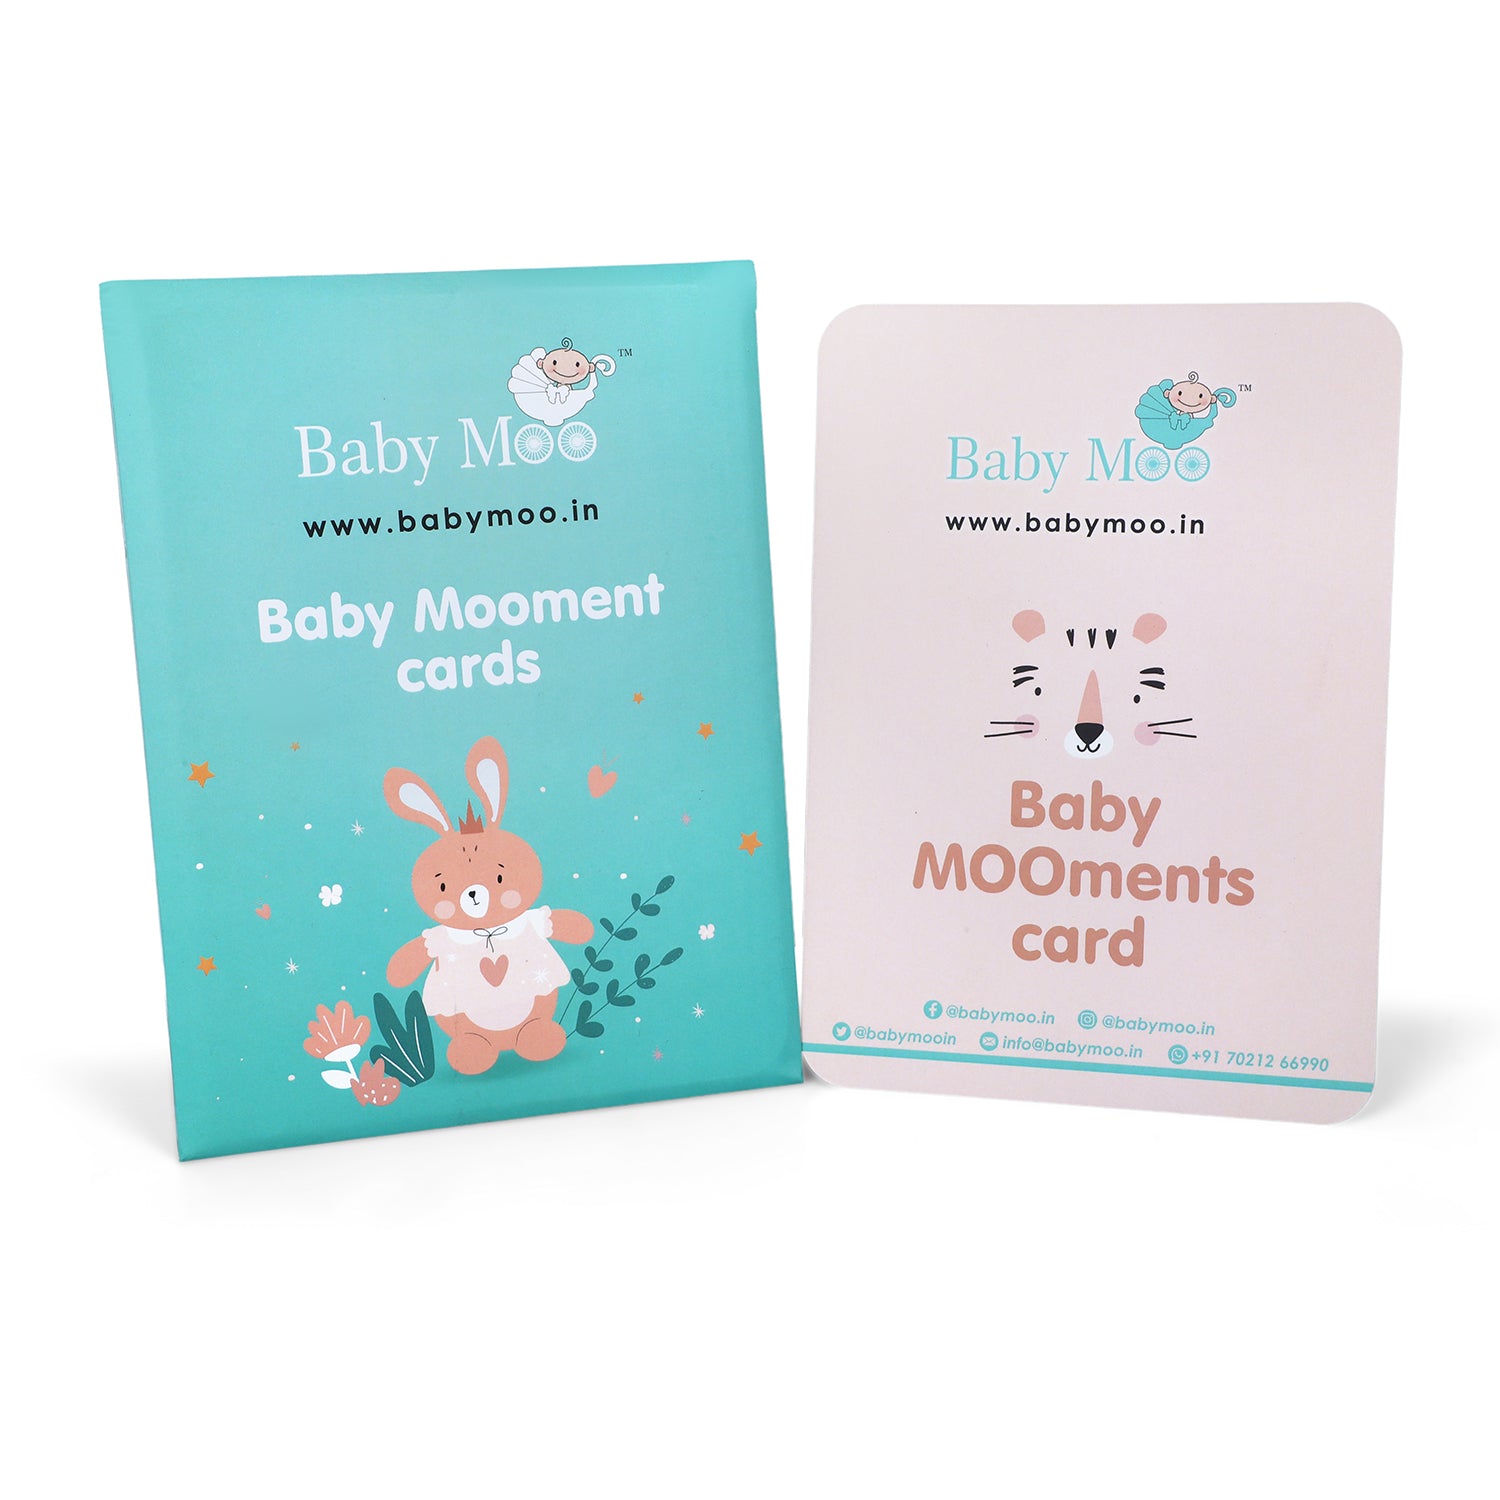 Baby MooMents First Year Milestone Cards - Baby Moo